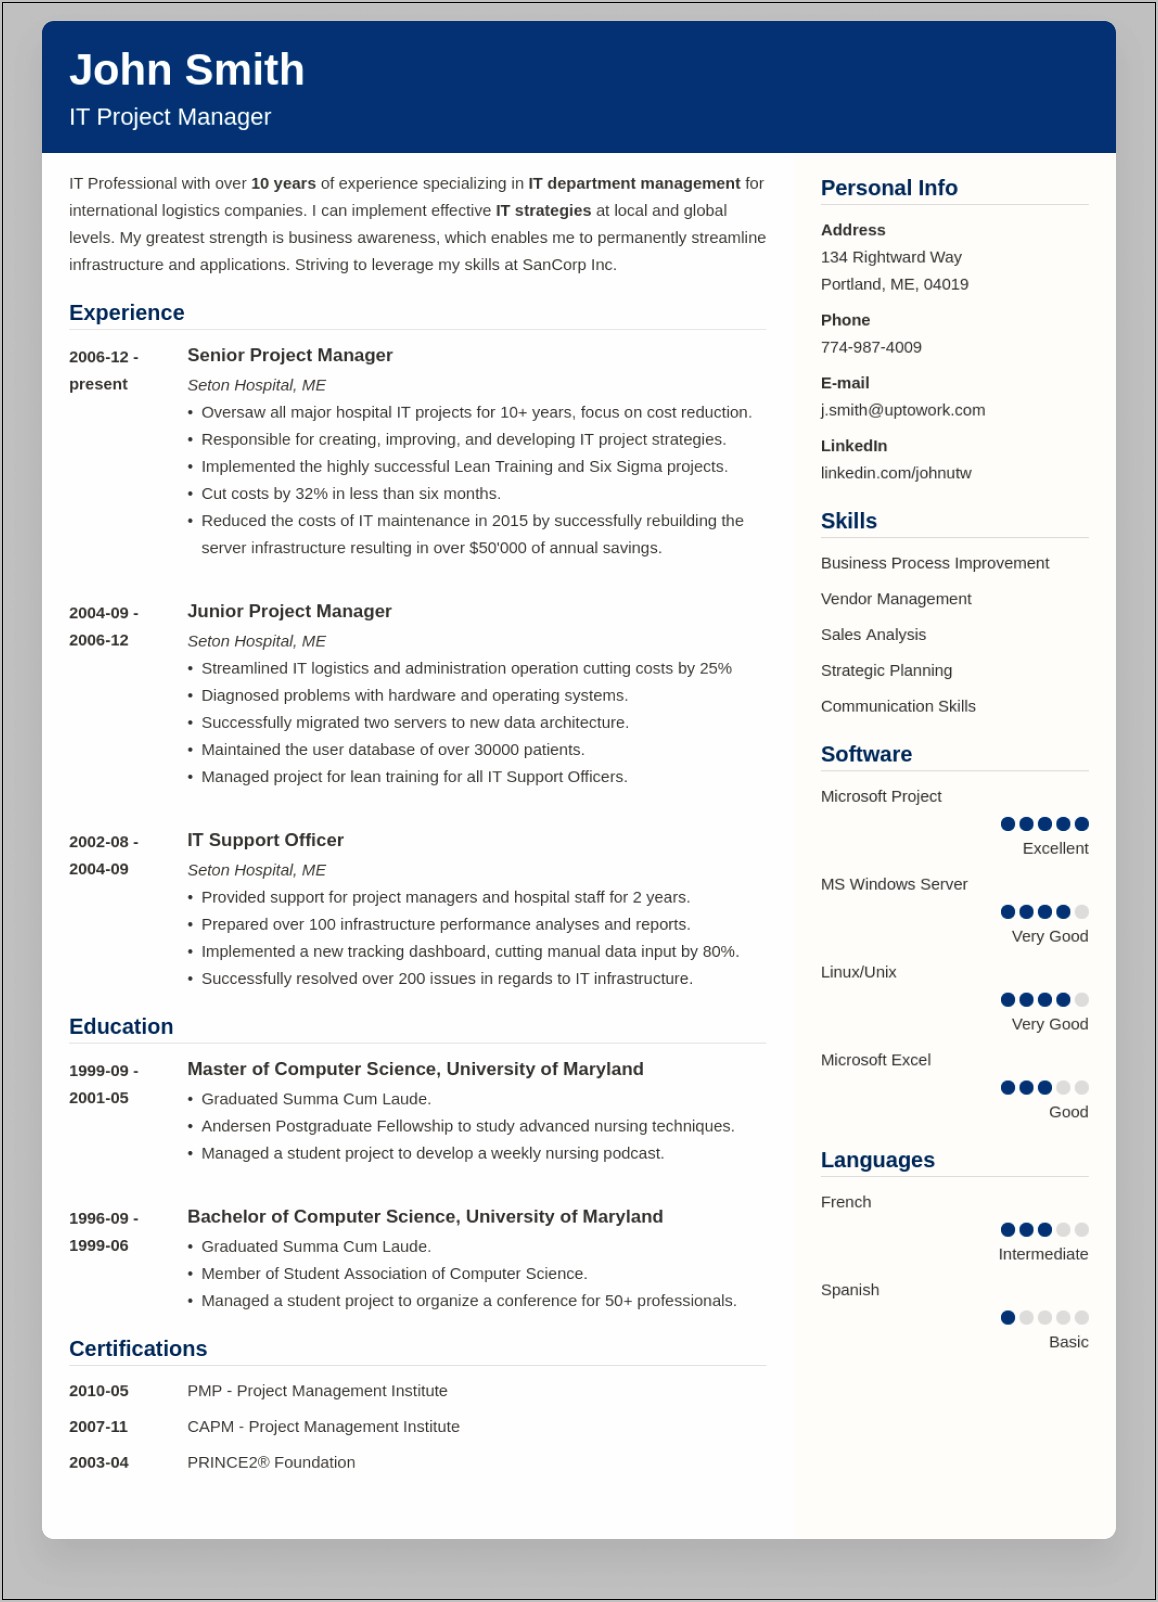 Examples Of The Top Professional Resumes